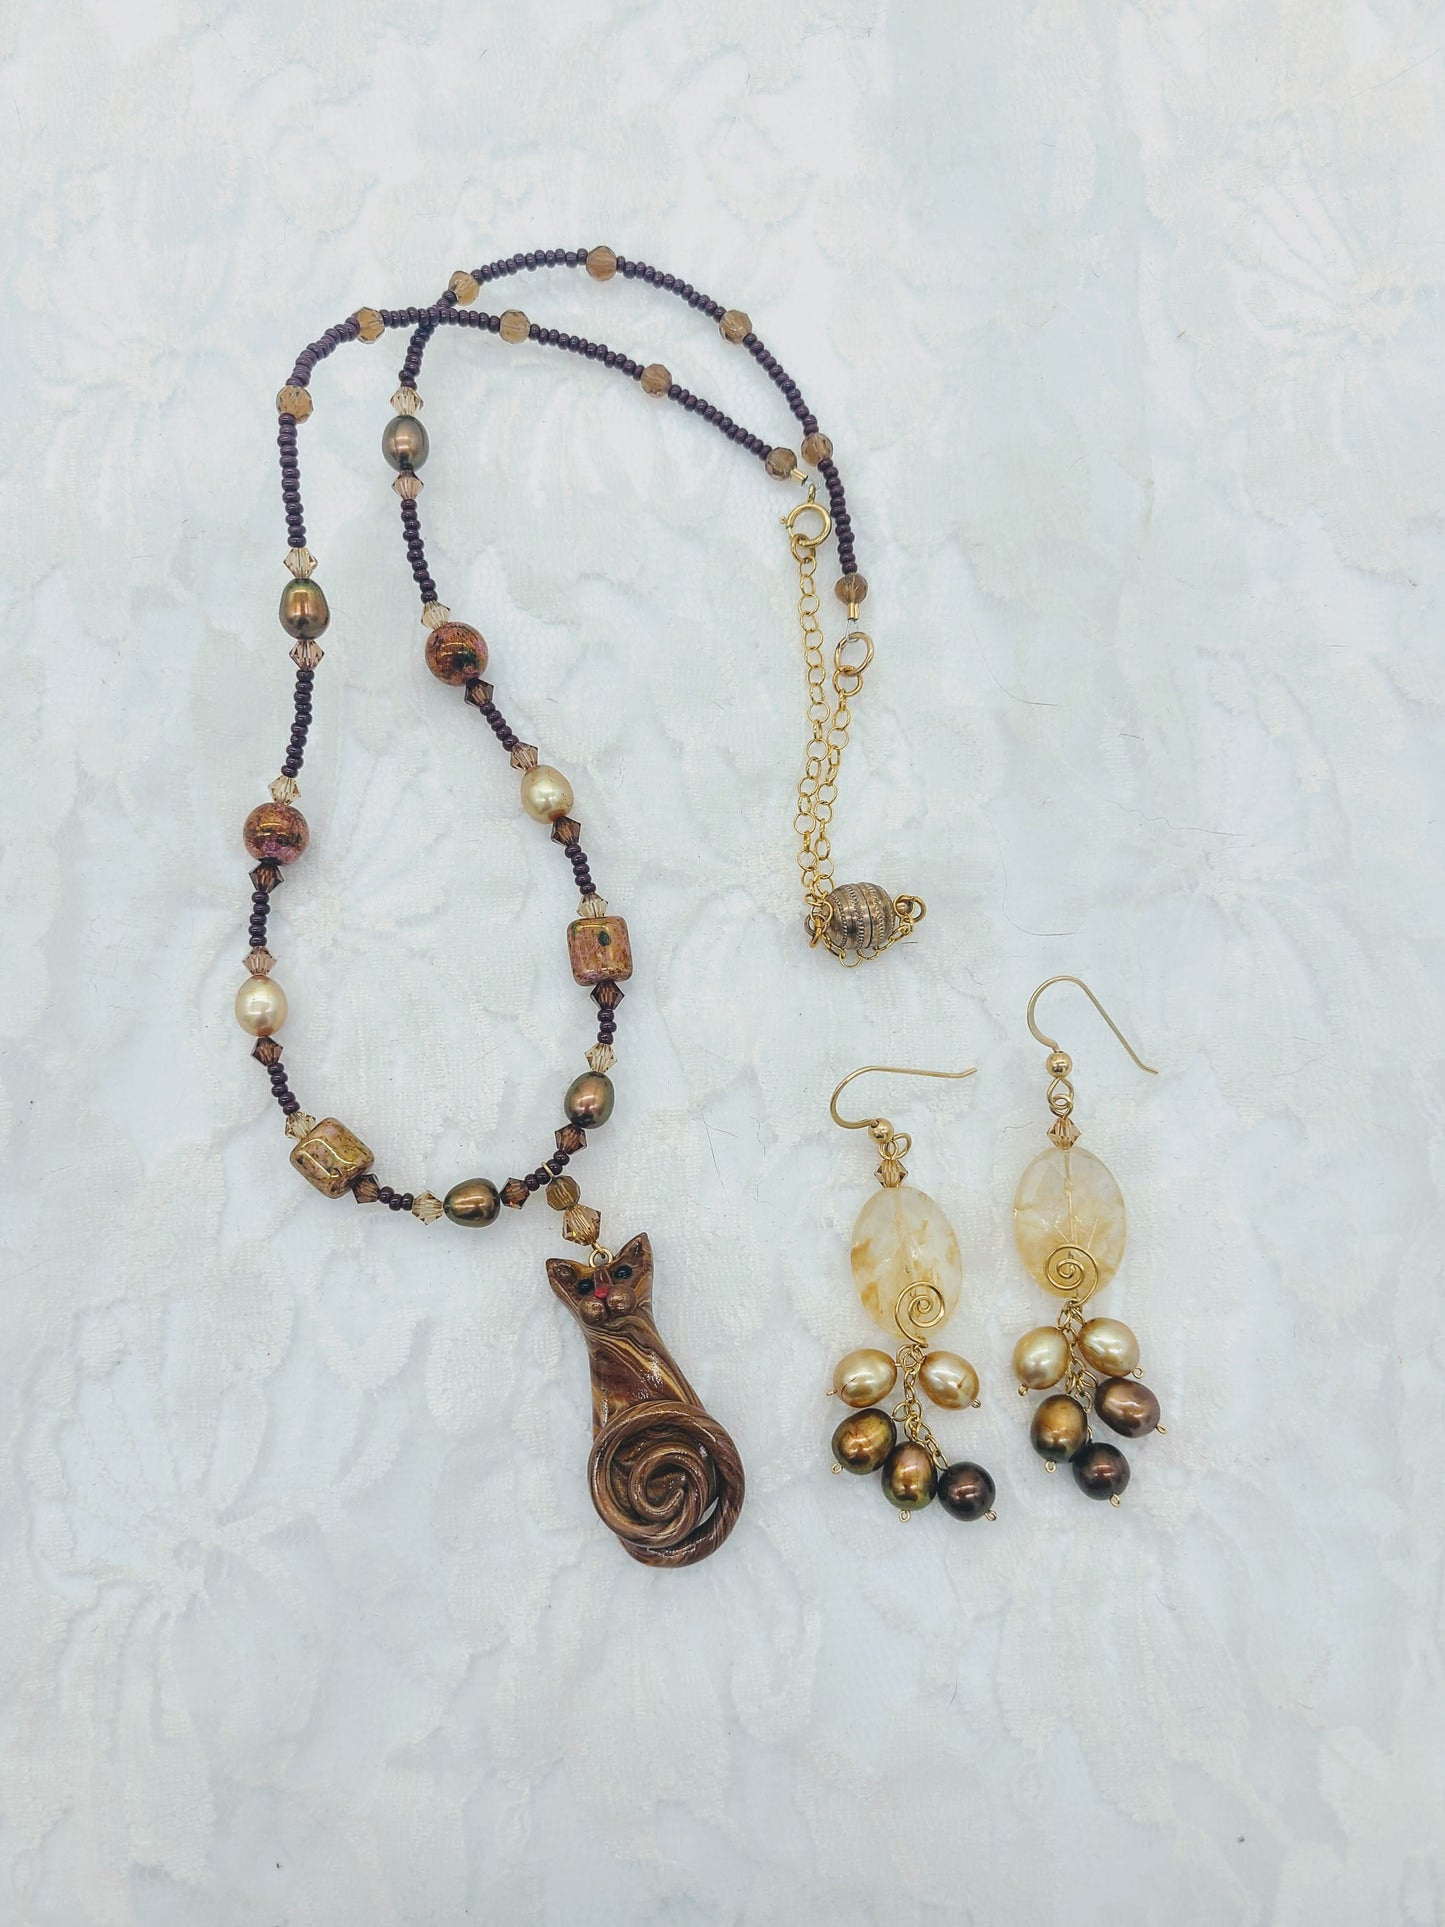 Jewelry Set Cat Necklace & Matching Earrings ~ Rutilated Quartz and Amber Aura Swarovski Faceted Crystal Beads w/Swarovski Pearls & 24kt Gold Accents ~ OOAK Jewelry SET